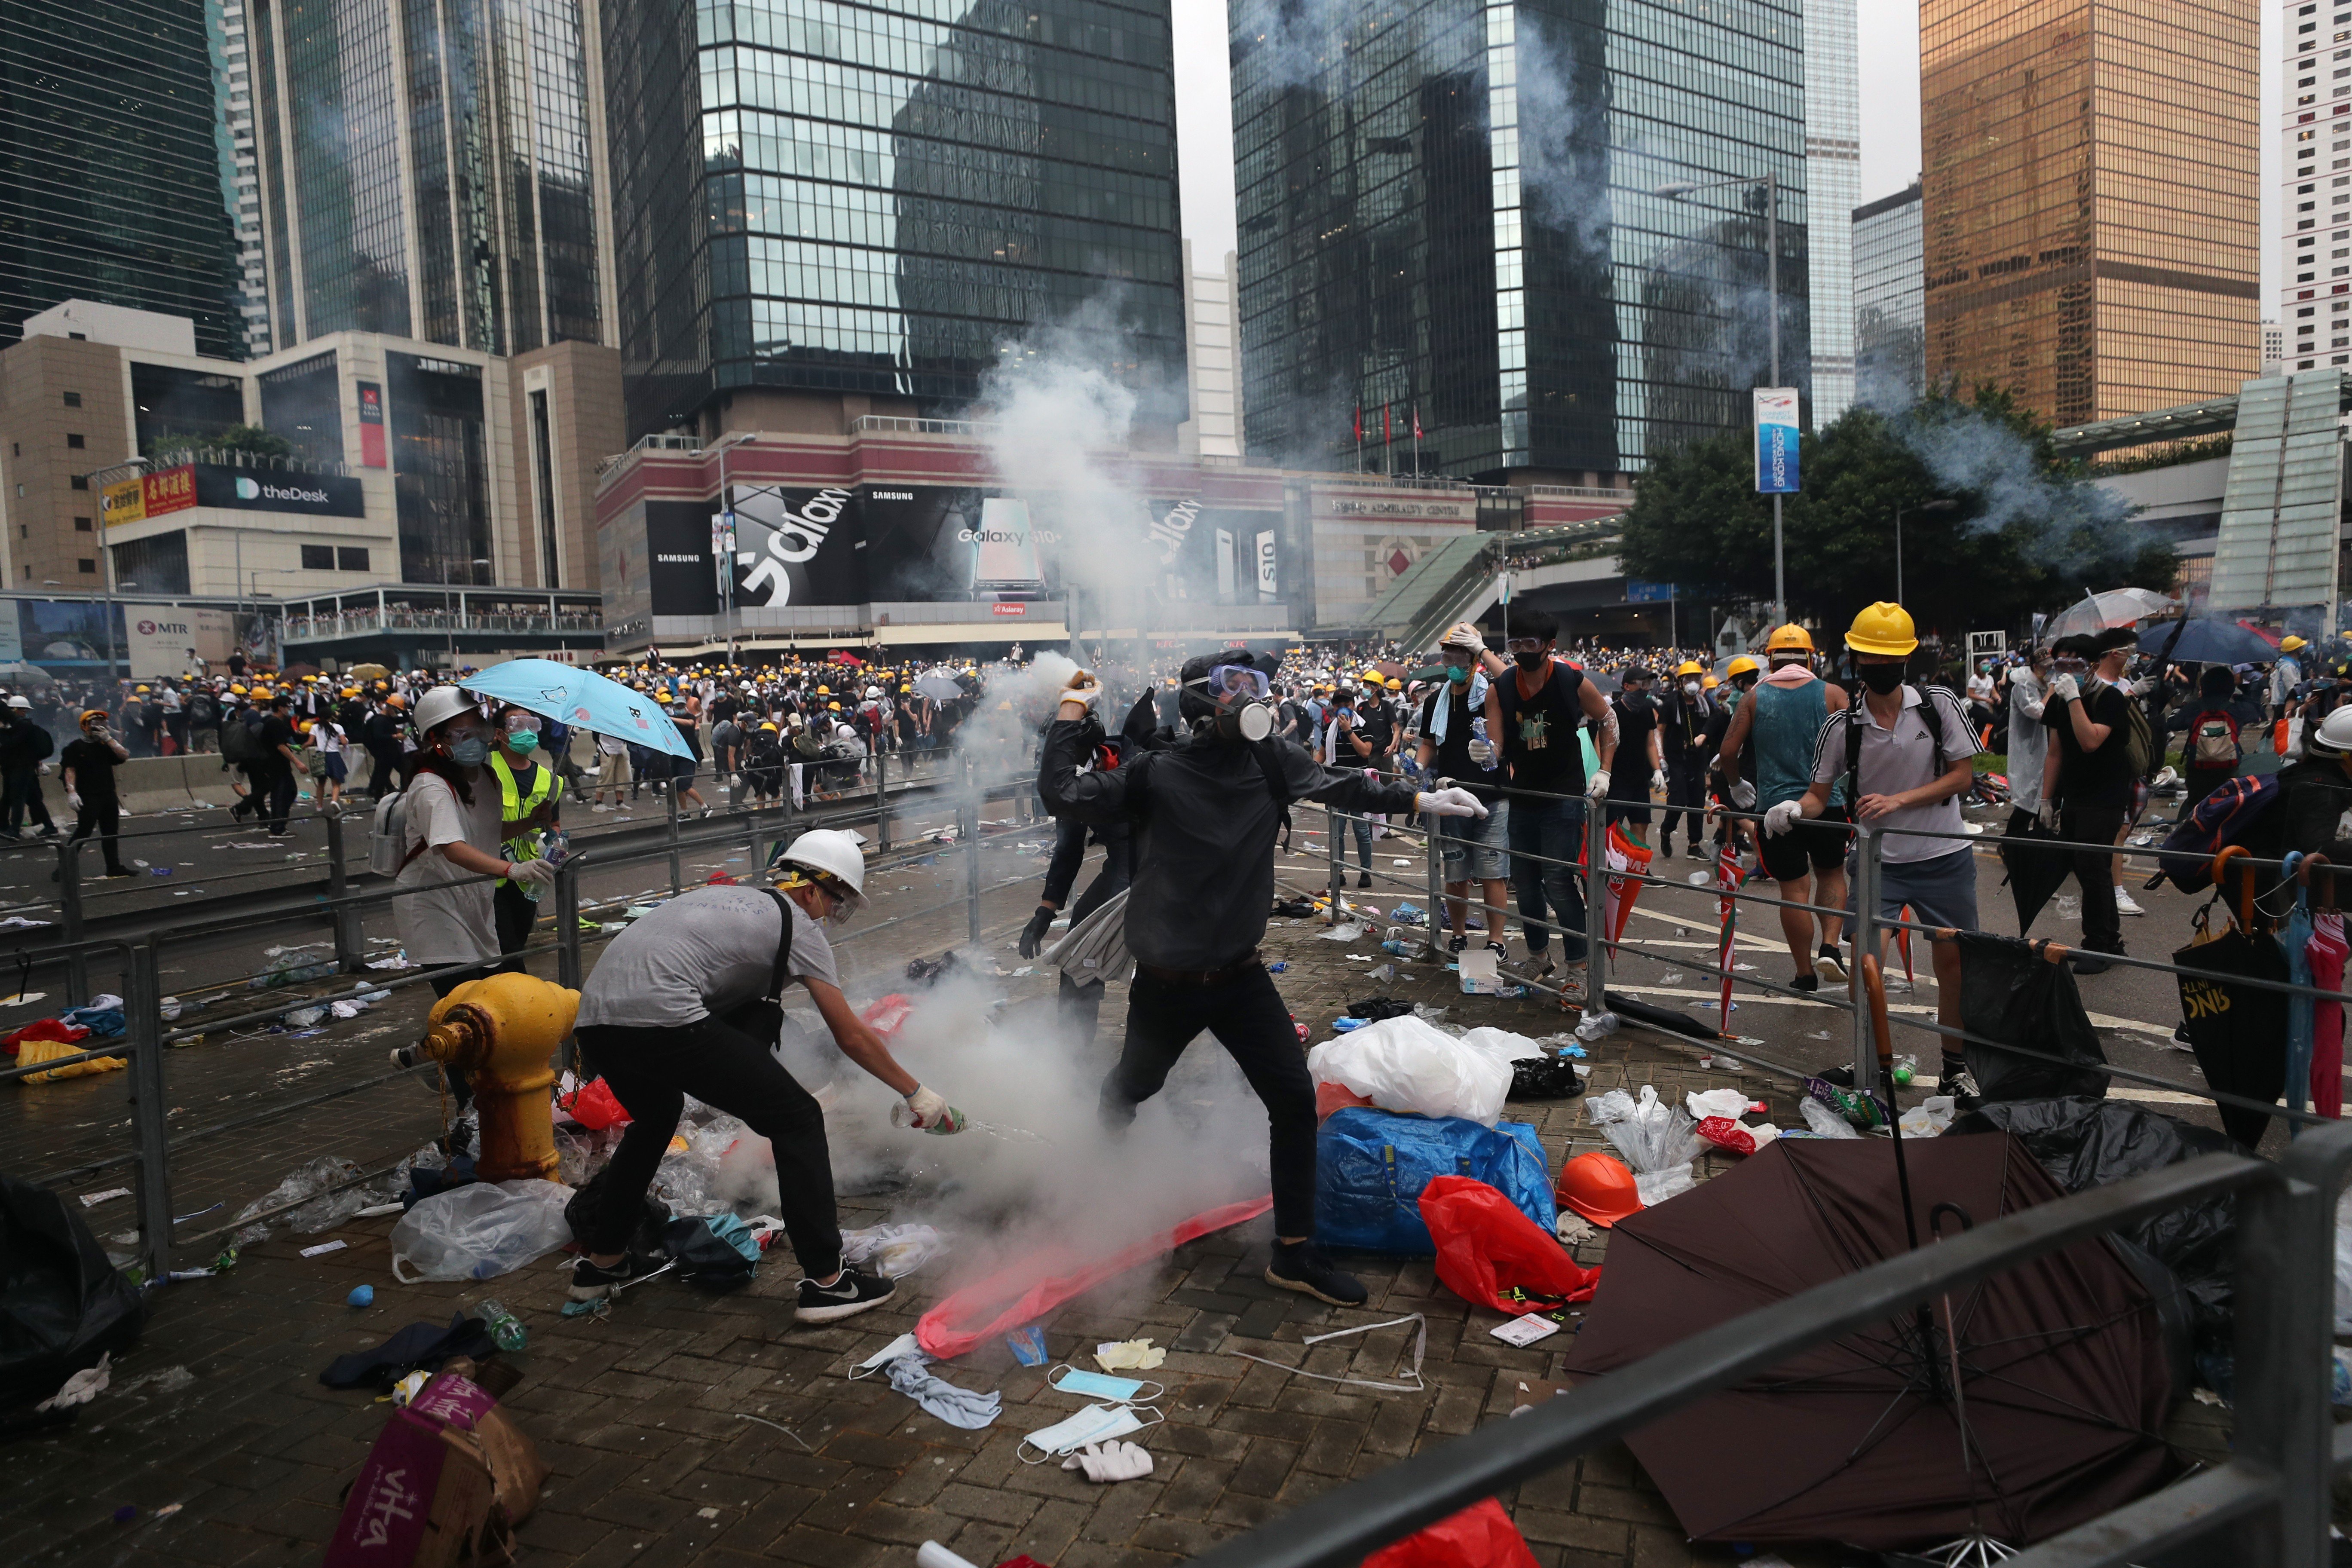 Anti-extradition demonstrators throw projectiles at police officers on Harcourt Road in Admiralty on June 12. Photo: Sam Tsang